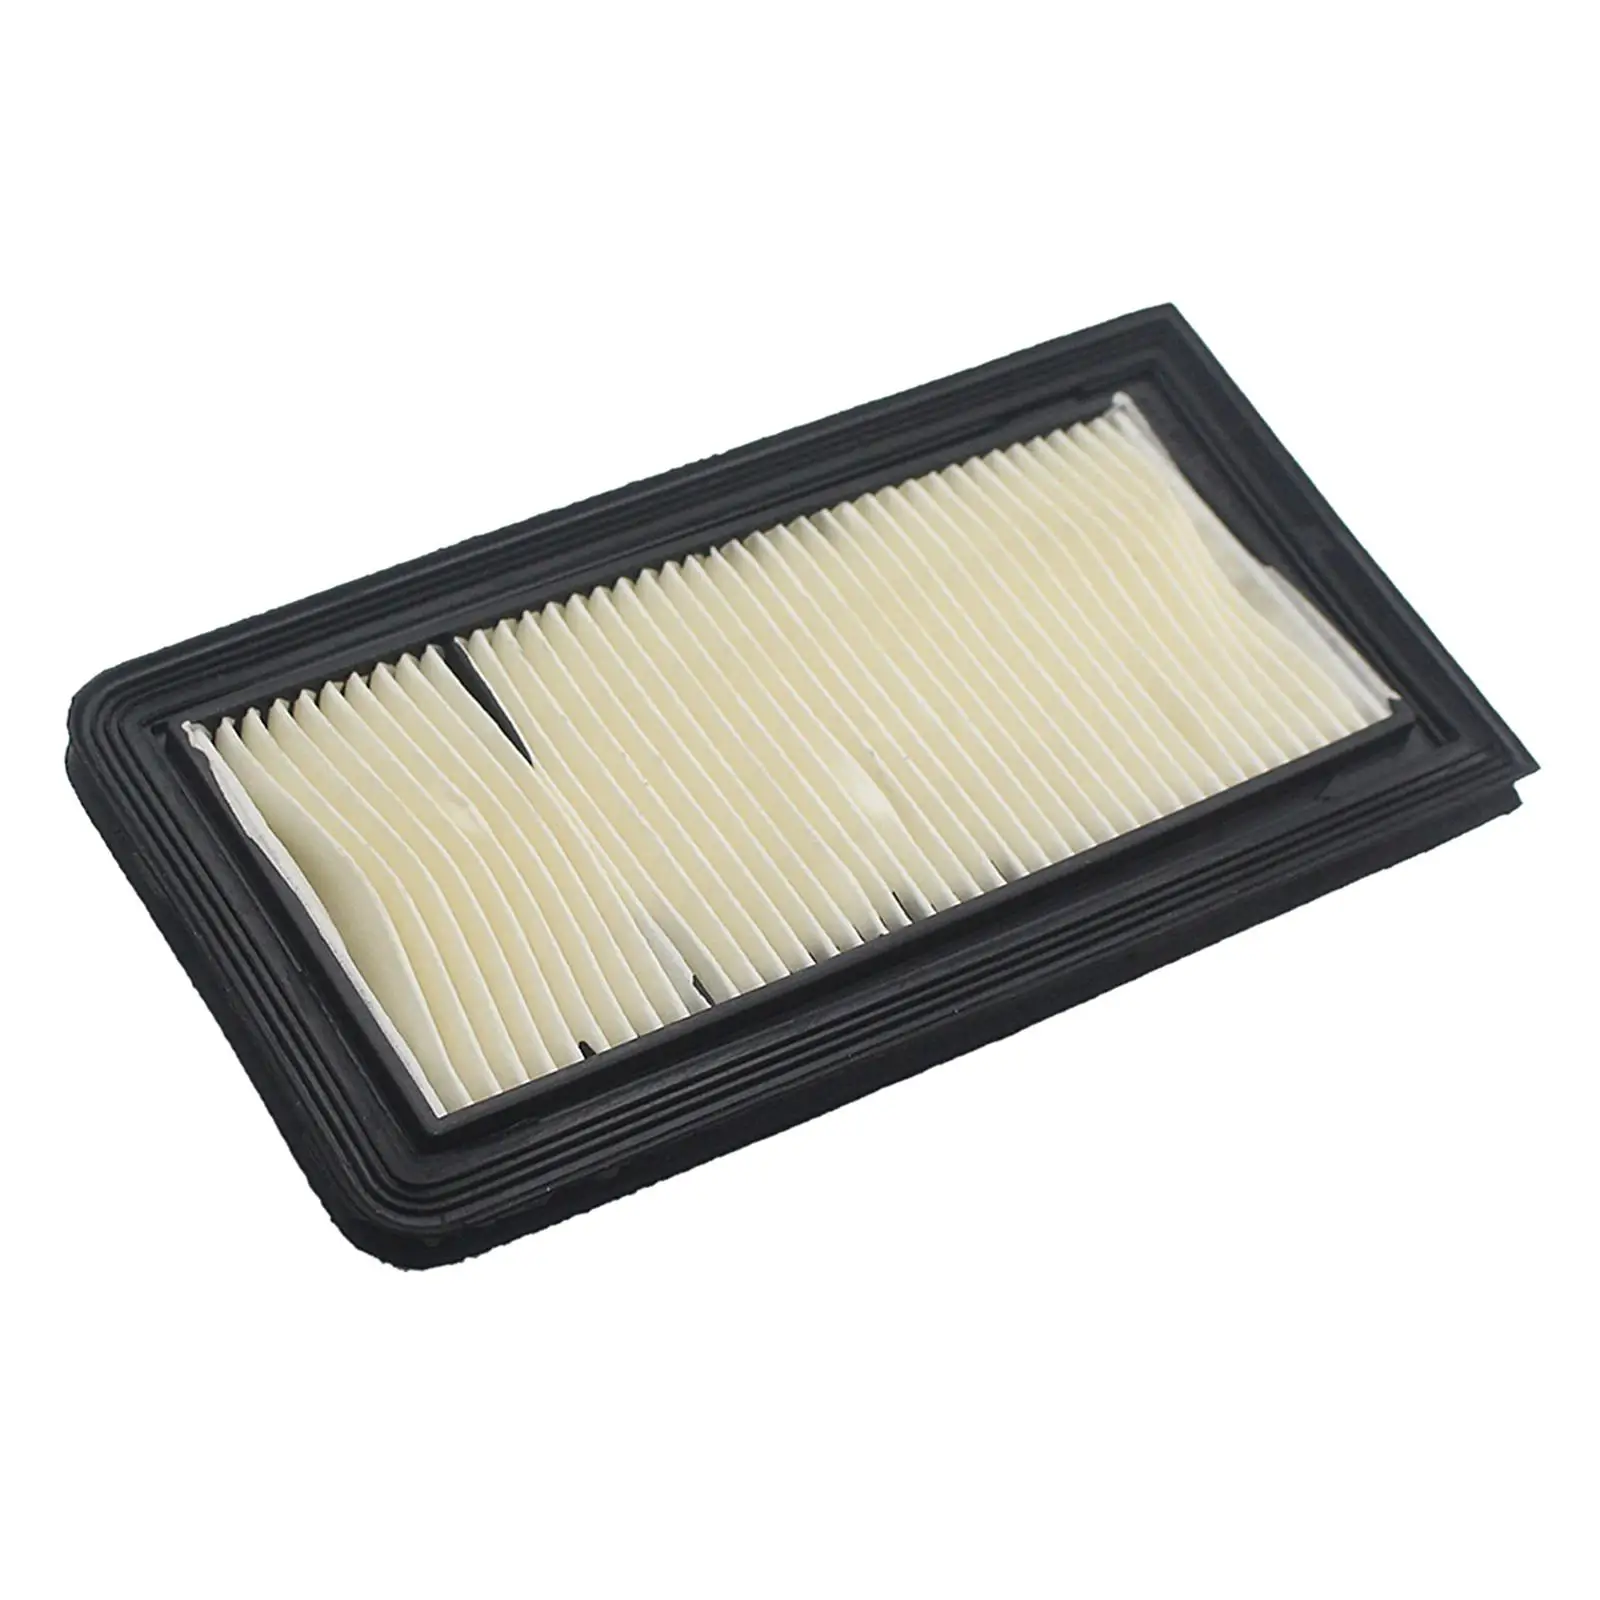 Motorcycle Air Filter Replace Fits for Suzuki AN650 SKYWAVE   650